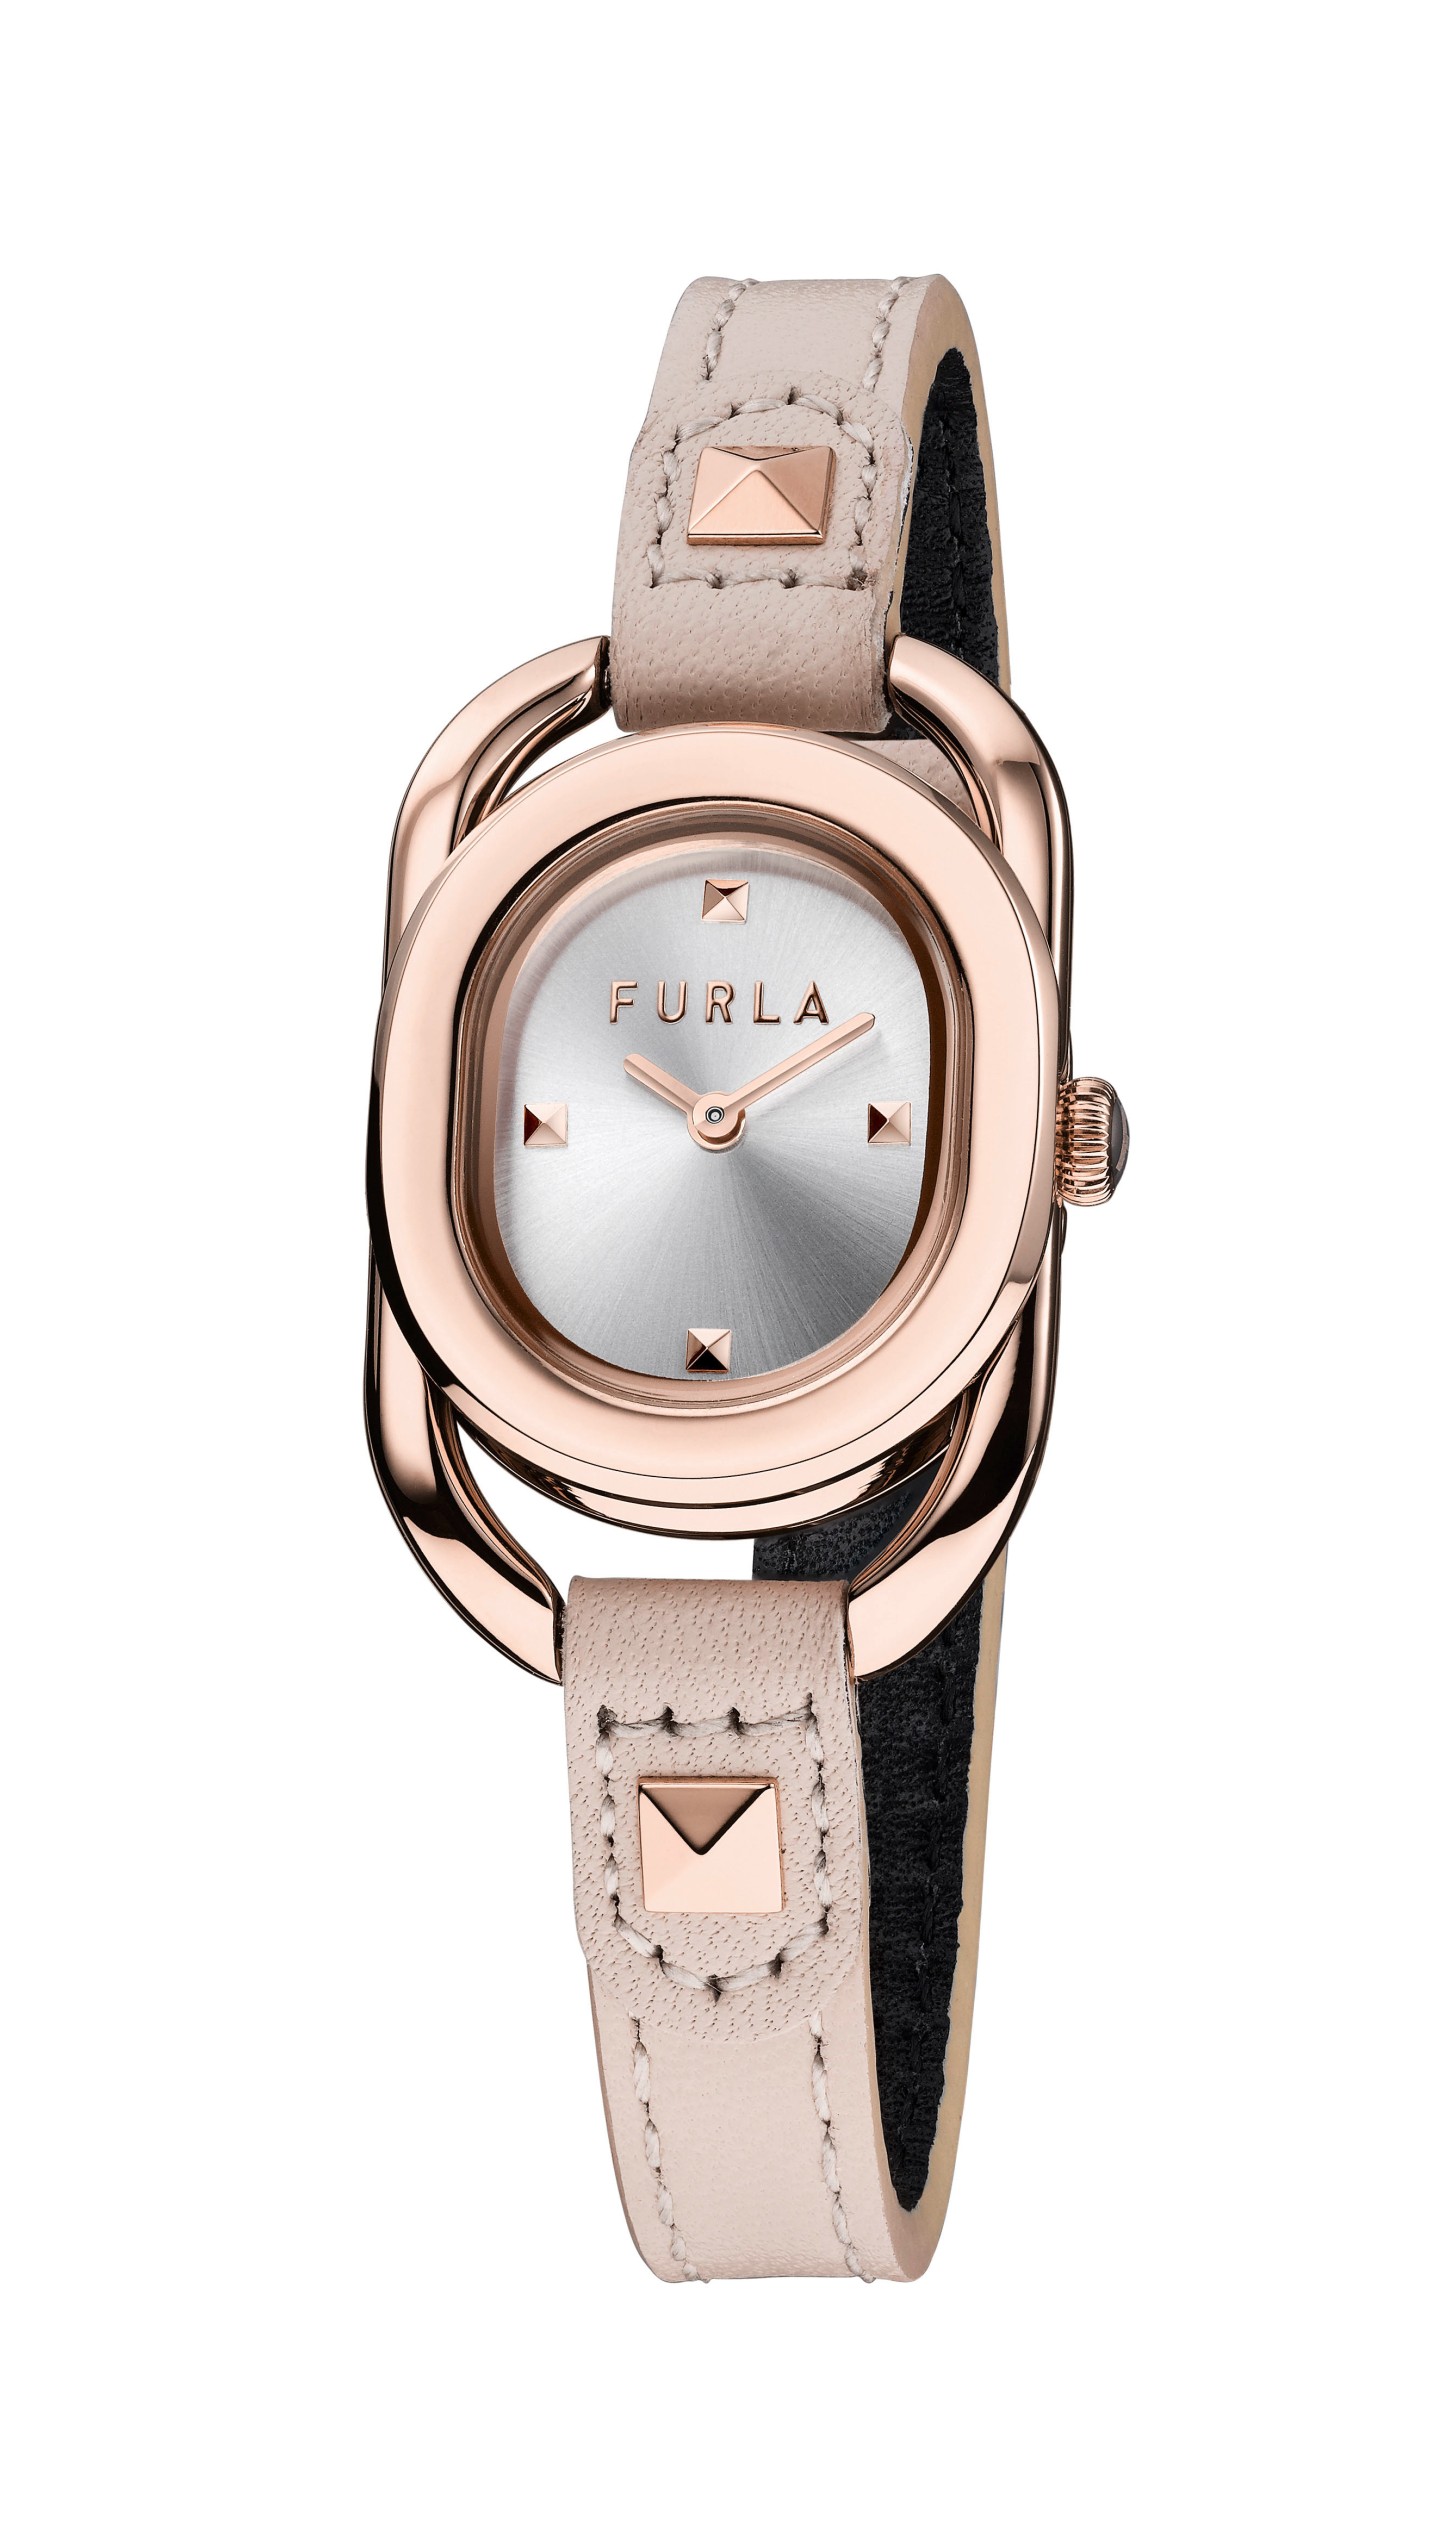 FURLA AND TIMEX GROUP ANNOUNCE A LICENSING AGREEMENT FOR THE PRODUCTION ...